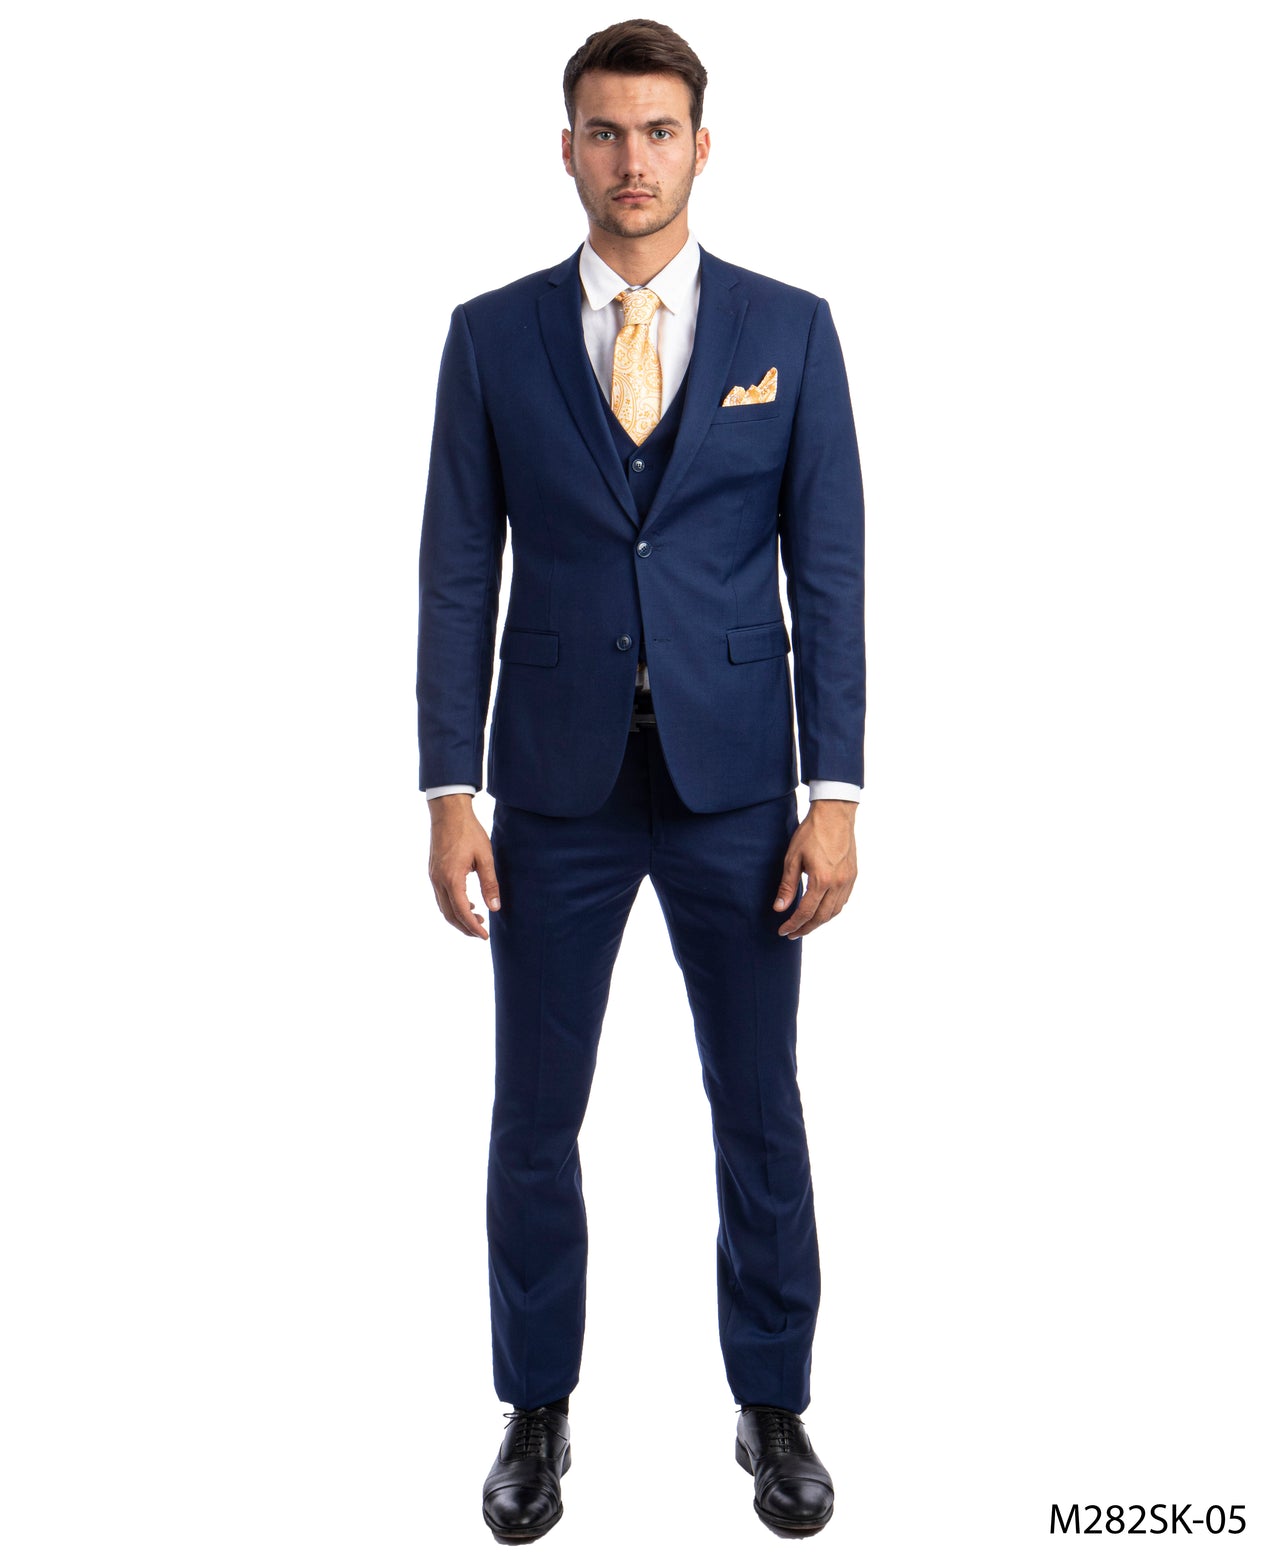 Indigo Suit For Men Formal Suits For All Ocassions - Hattitude